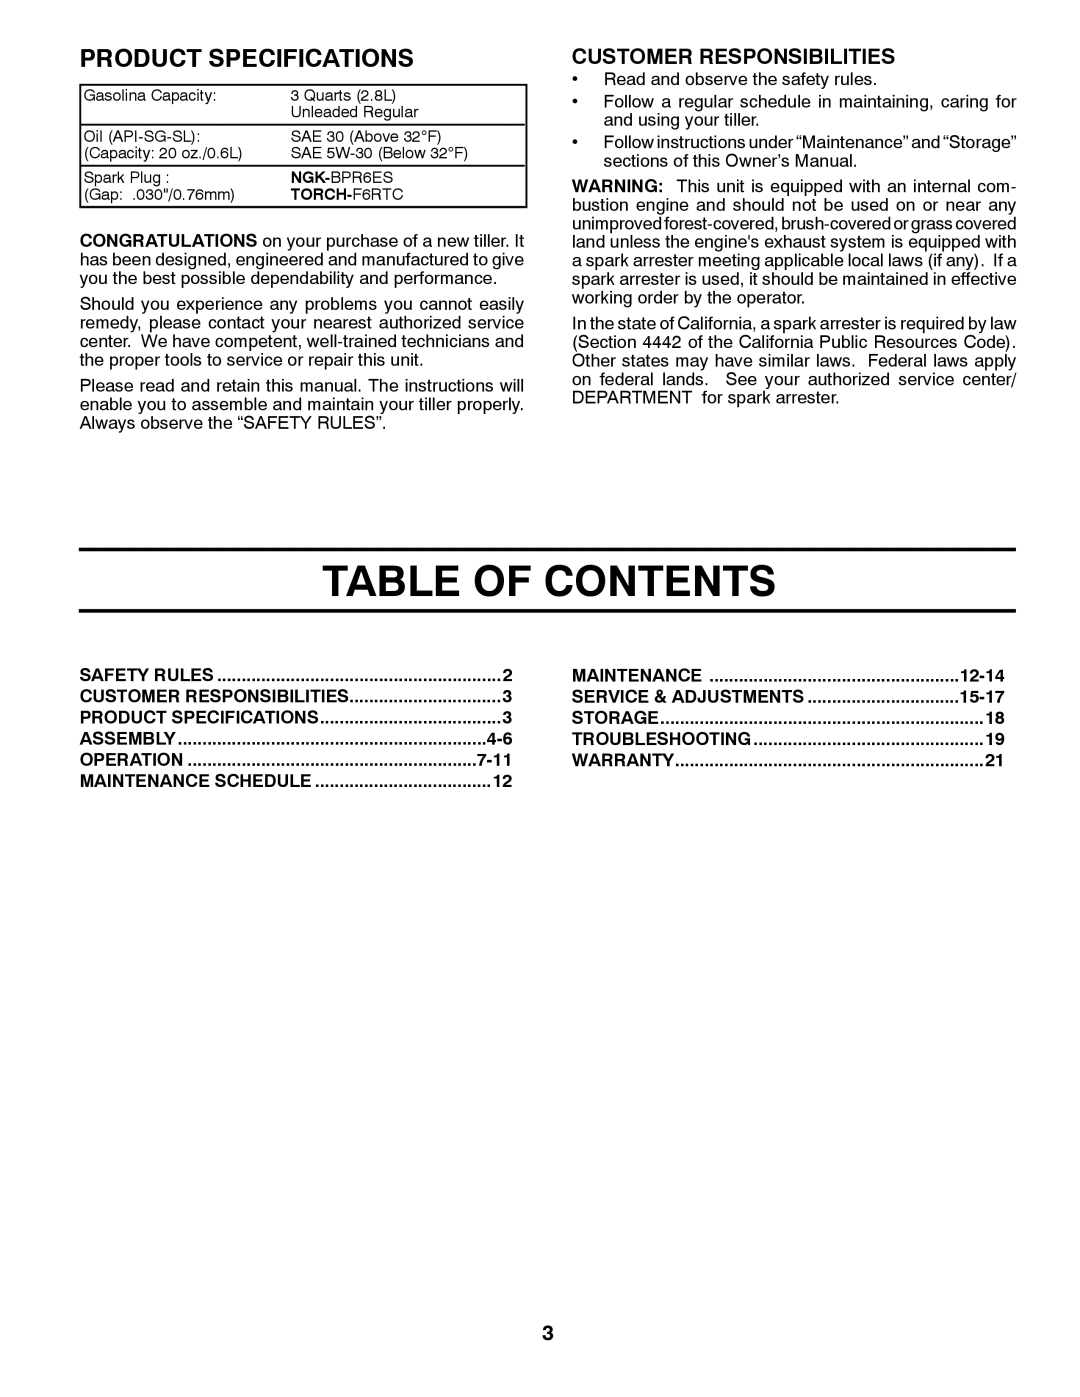 Poulan 423813 manual Table Of Contents, Product Specifications, Customer Responsibilities, 12-14, 15-17, 7-11 